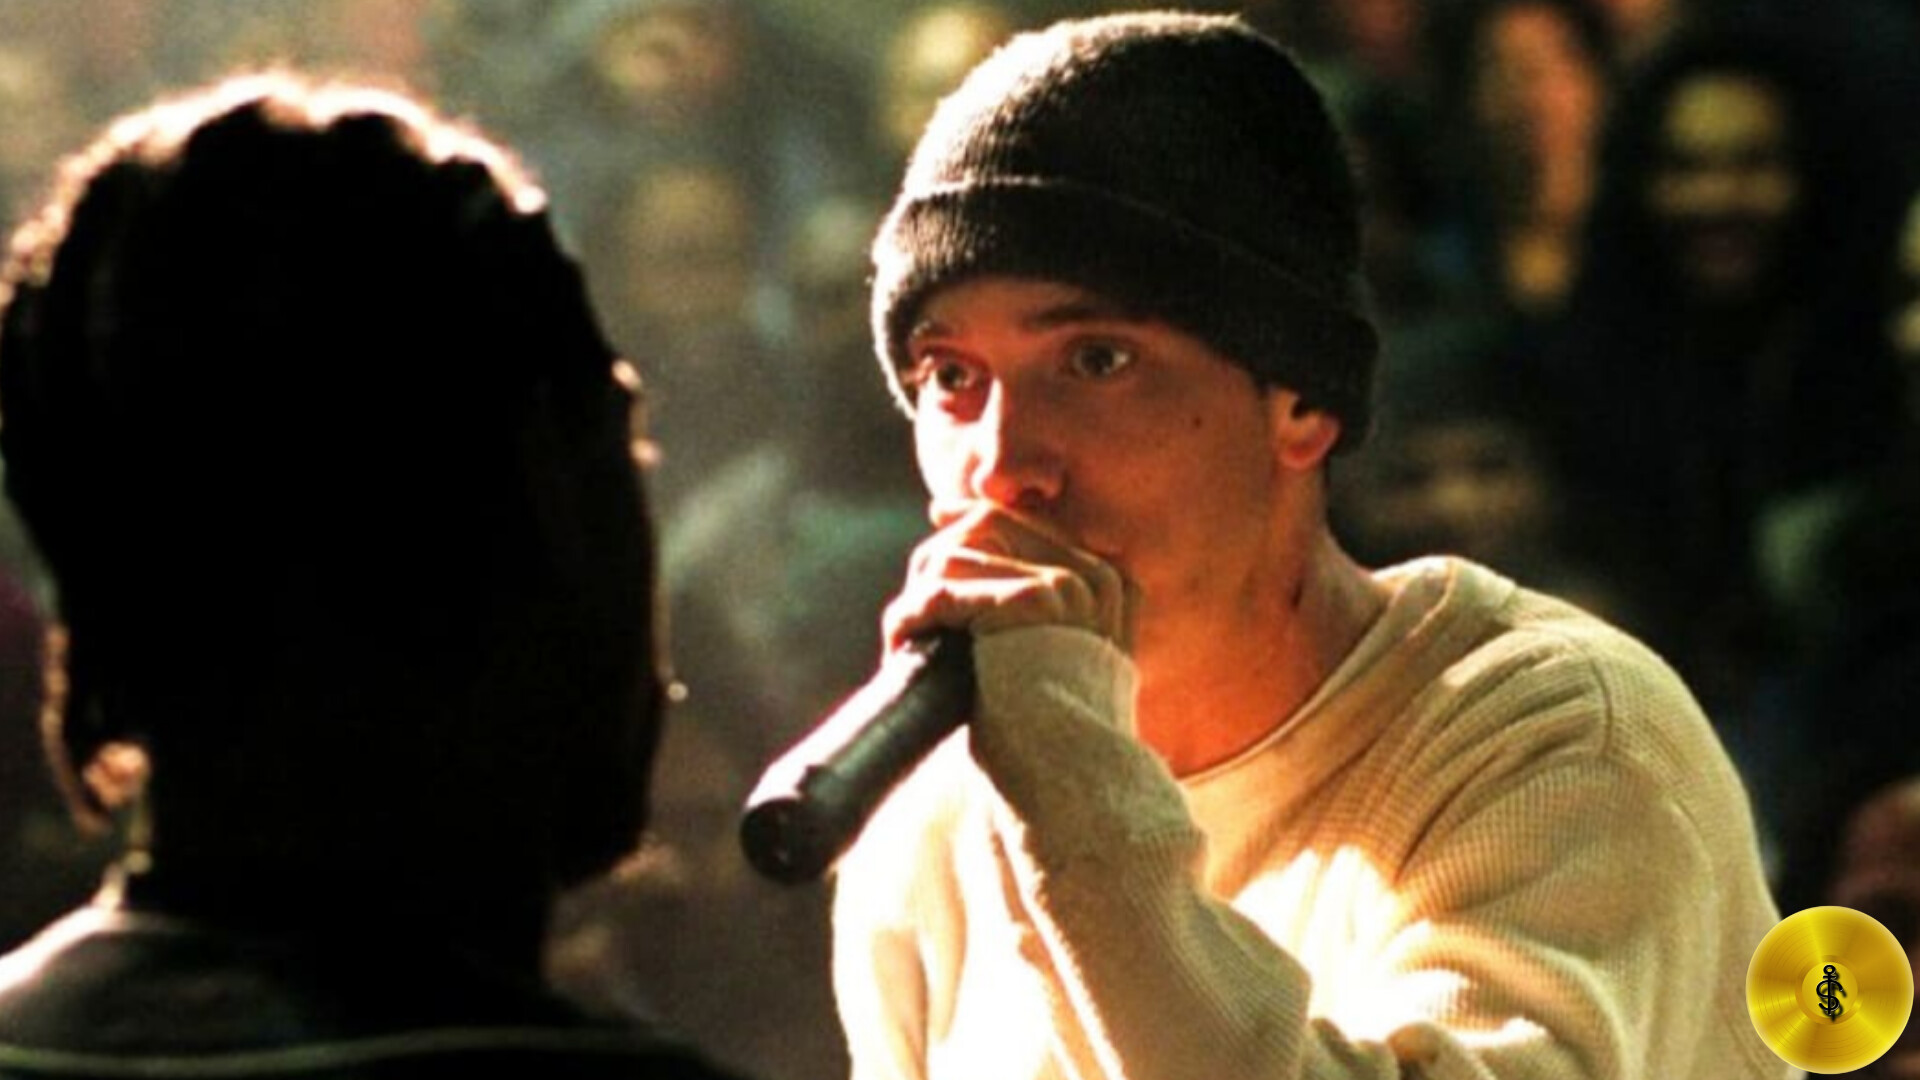 Watch Eminem Battle in Real-Life: 8 Mile True Story?